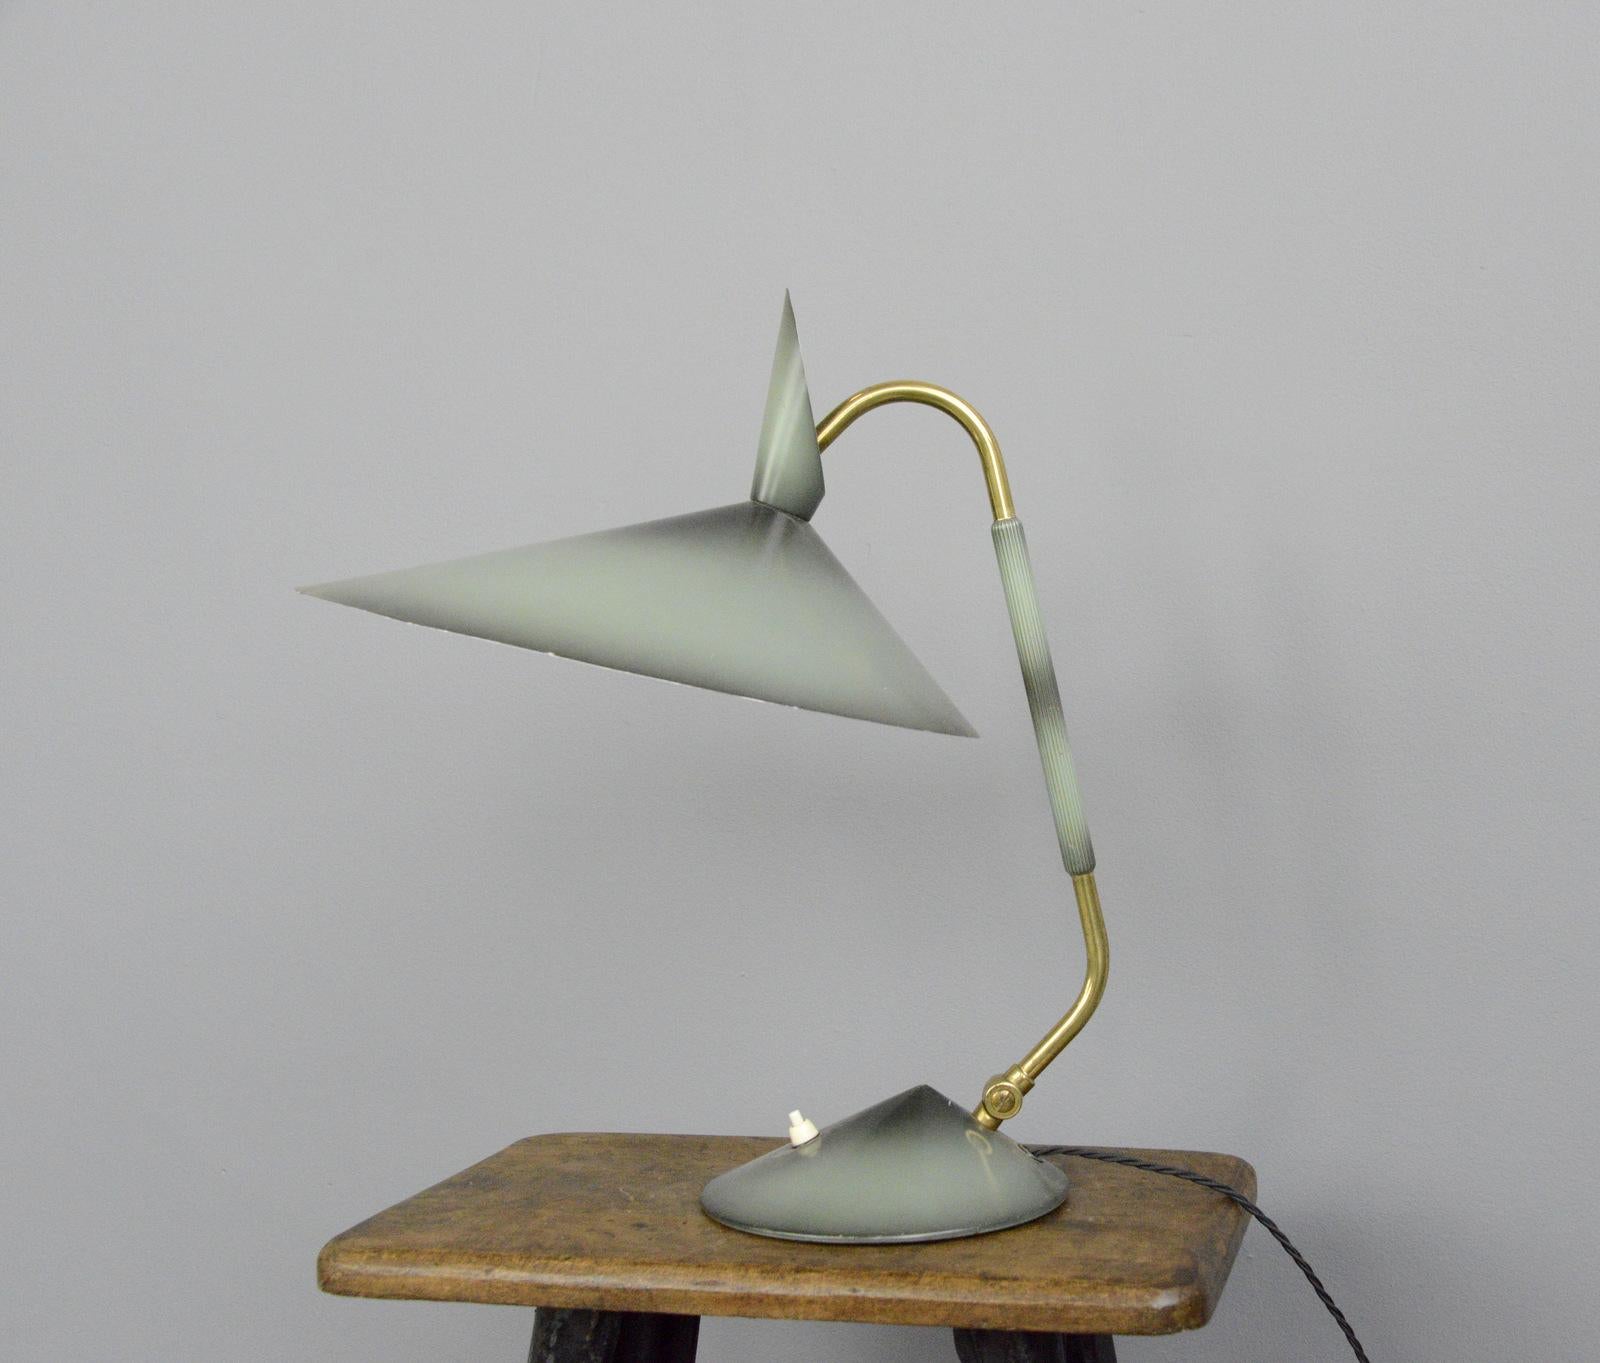 Midcentury table lamp by Helo, circa 1960s

- Original 2-tone black and blue paint
- Brass adjustable arm
- Aluminium shade
- Takes E27 fitting bulbs
- On/Off push button switch on the base
- Made by Helo
- German, 1960s
- Measures: 49cm